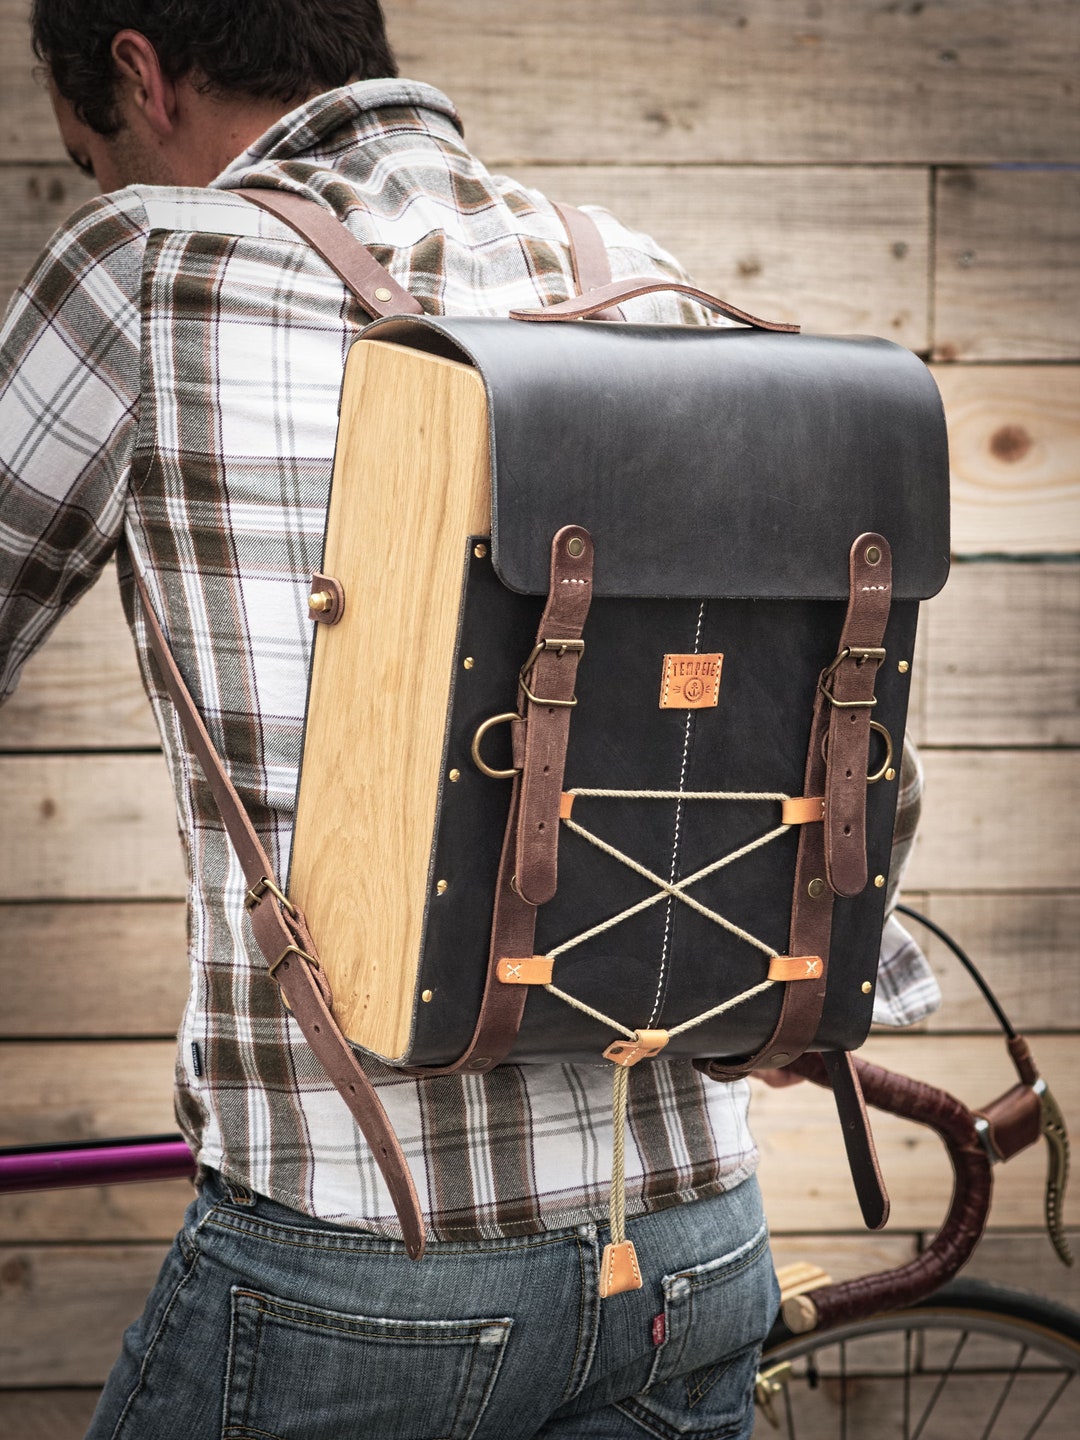 Leather and Wood Backpack. Bike Bag Leather and Wood. Vegetable Tanned ...